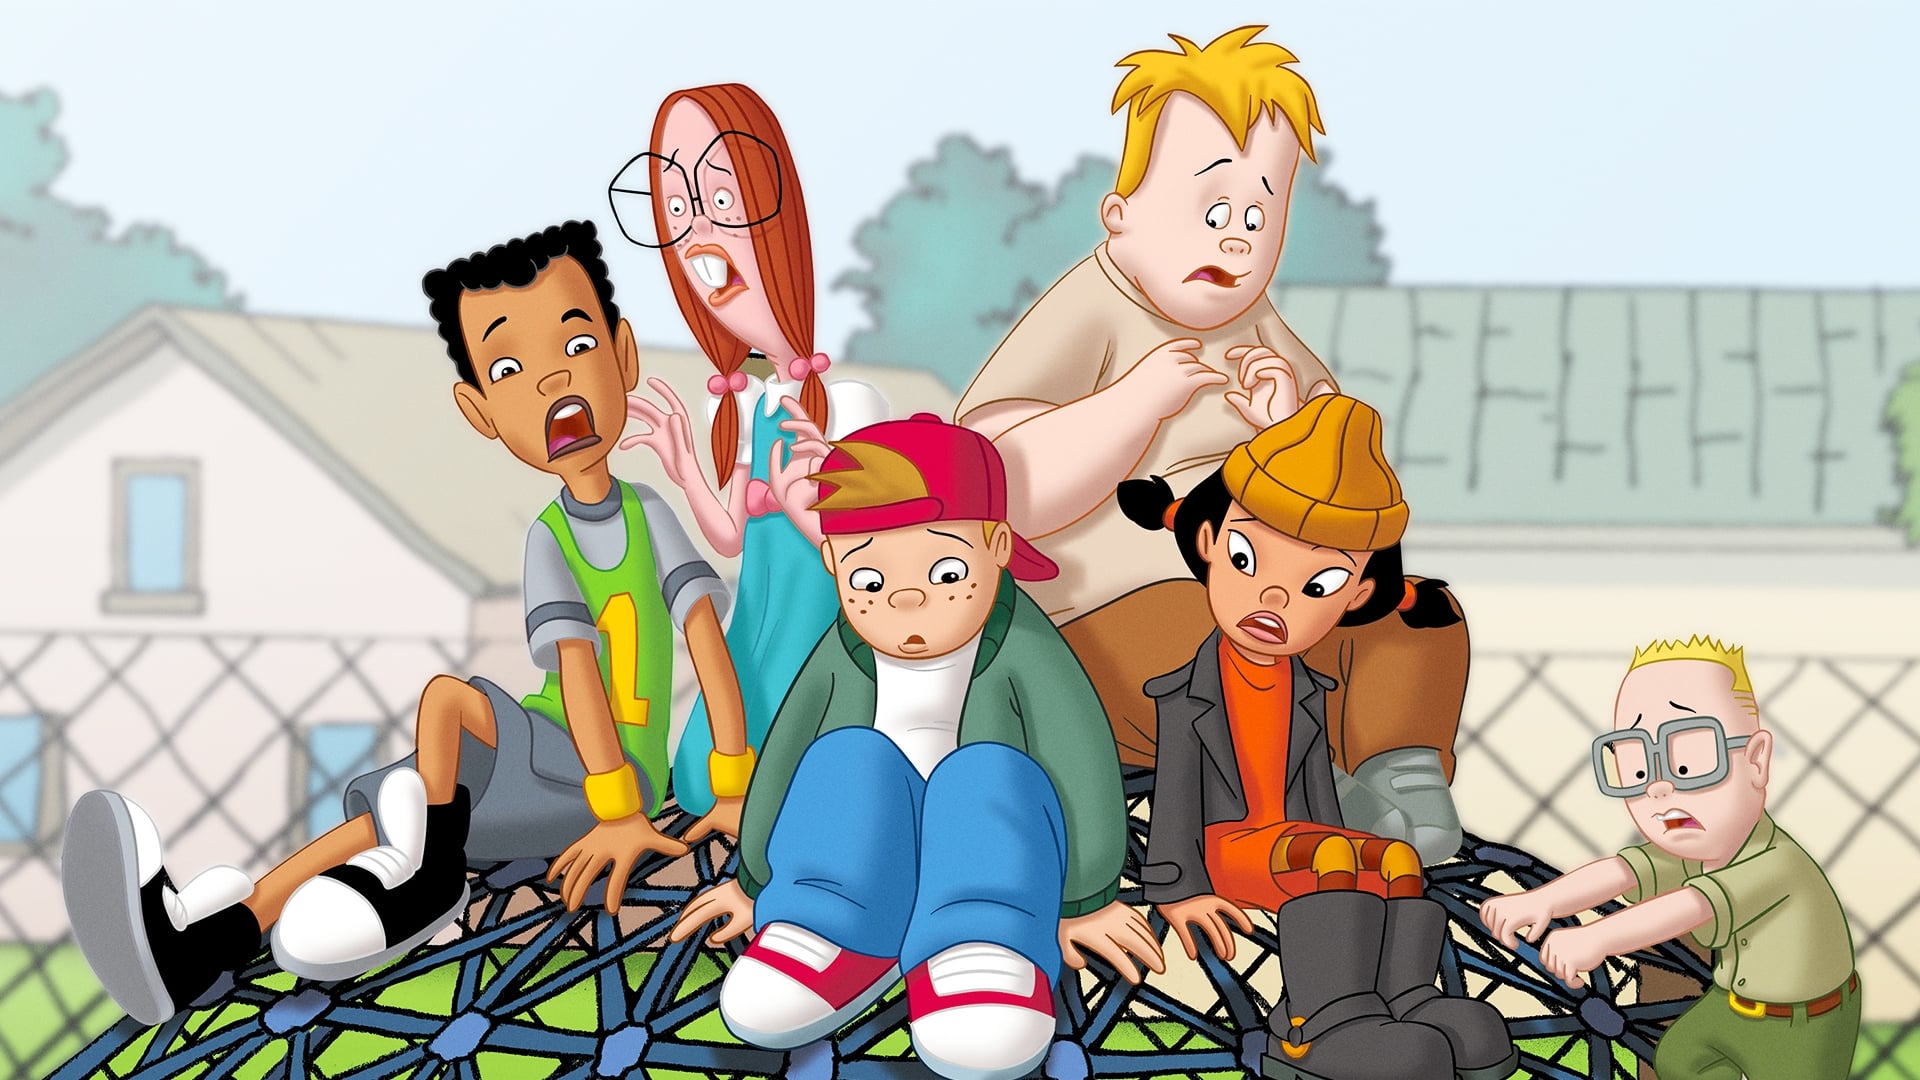 Recess: All Growed Down (2003)